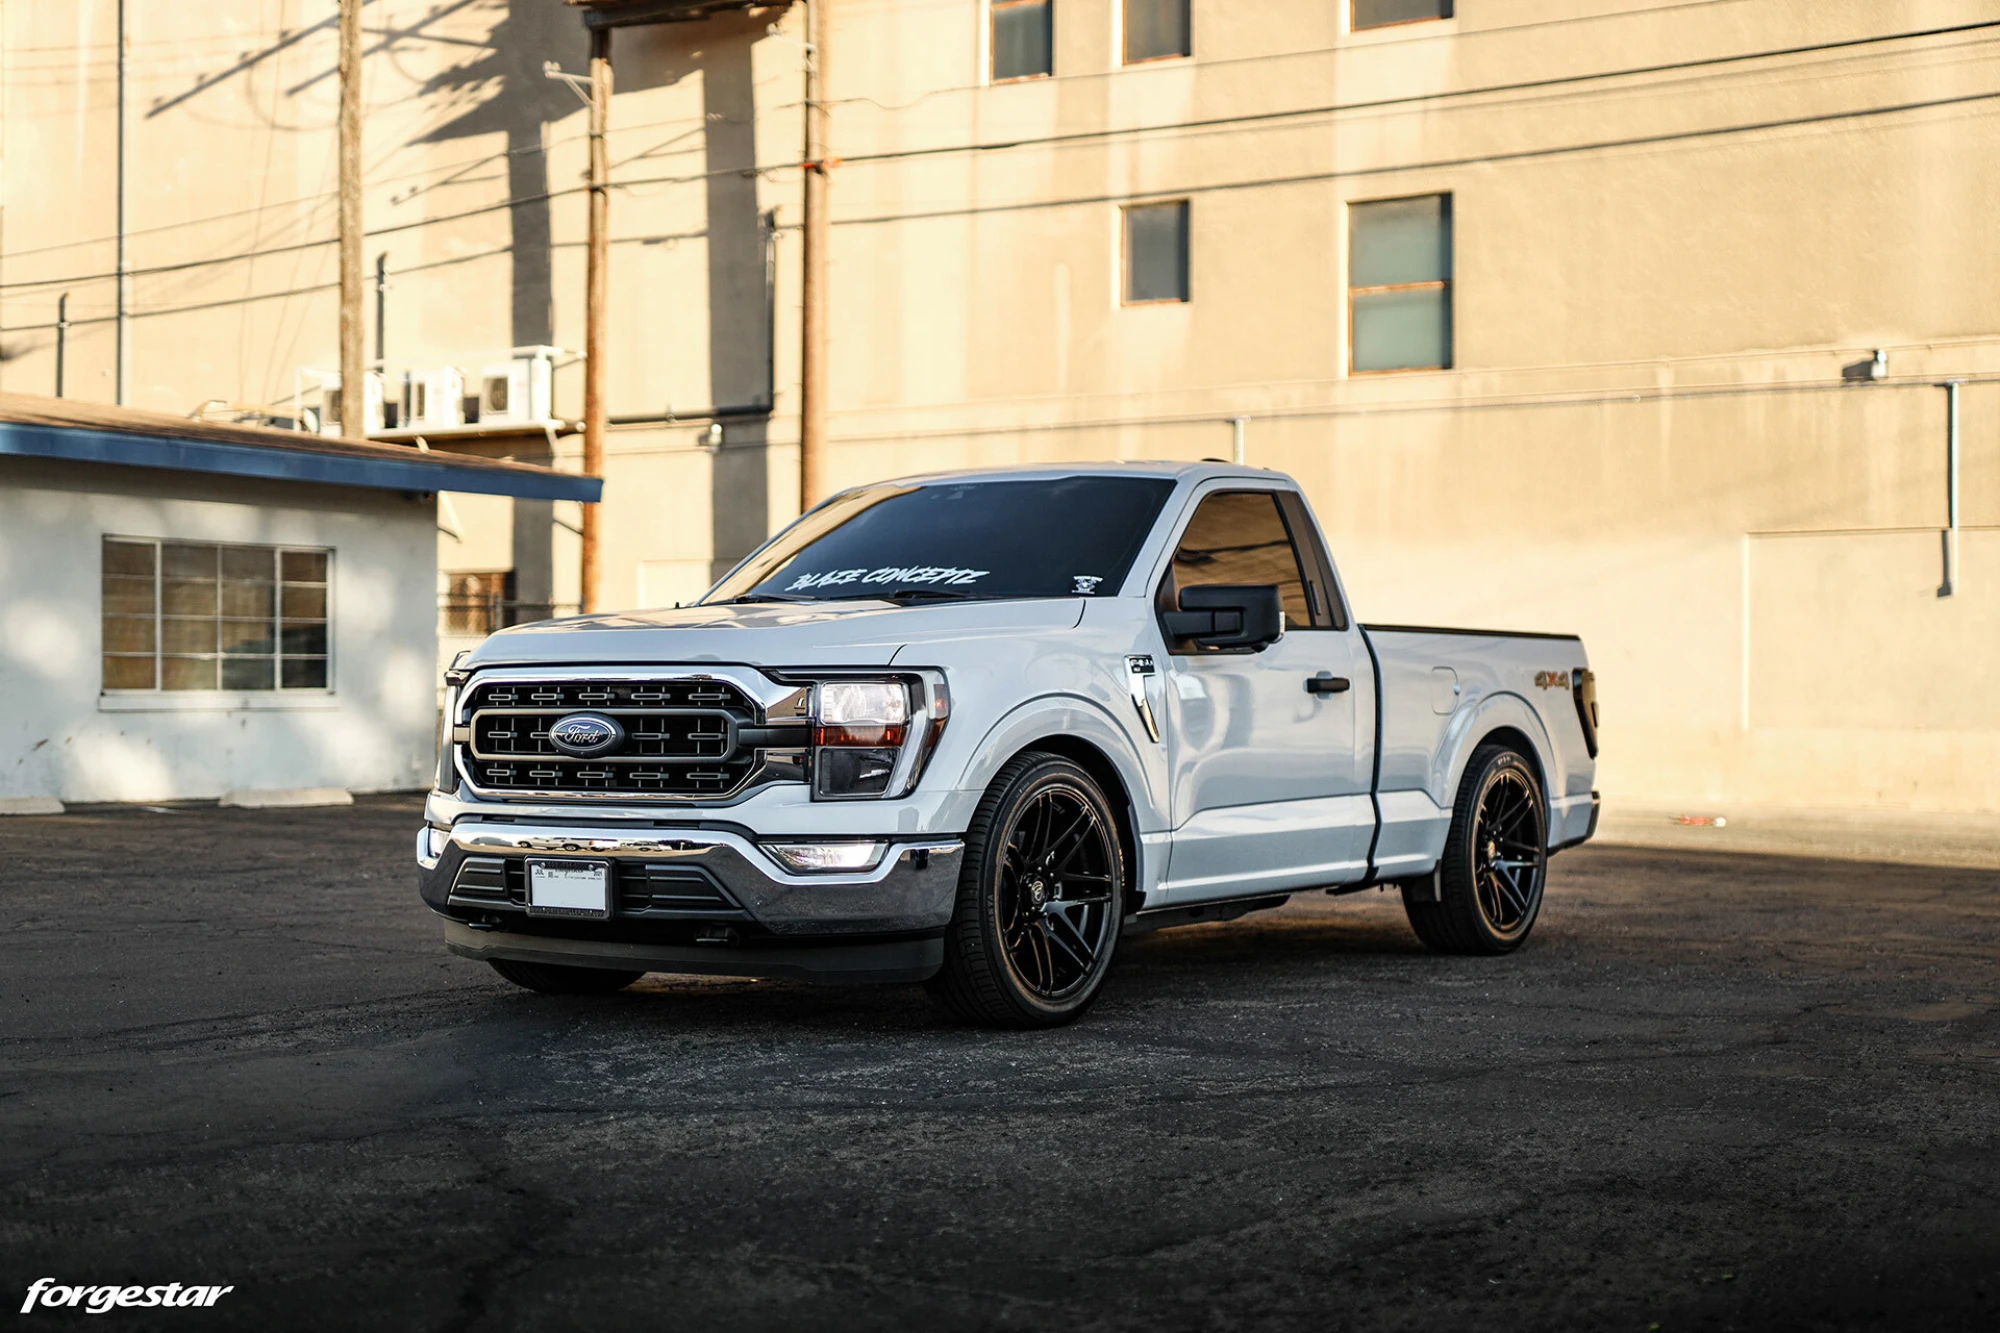 https://mwcompany-forgestar.files.svdcdn.com/production/galleryImages/_2000xAUTO_fit_center-center_90_none/7413/white-modified-ford-f150-xlt-6-lug-gloss-black-rims-forgestar-x14-wheels-u.webp